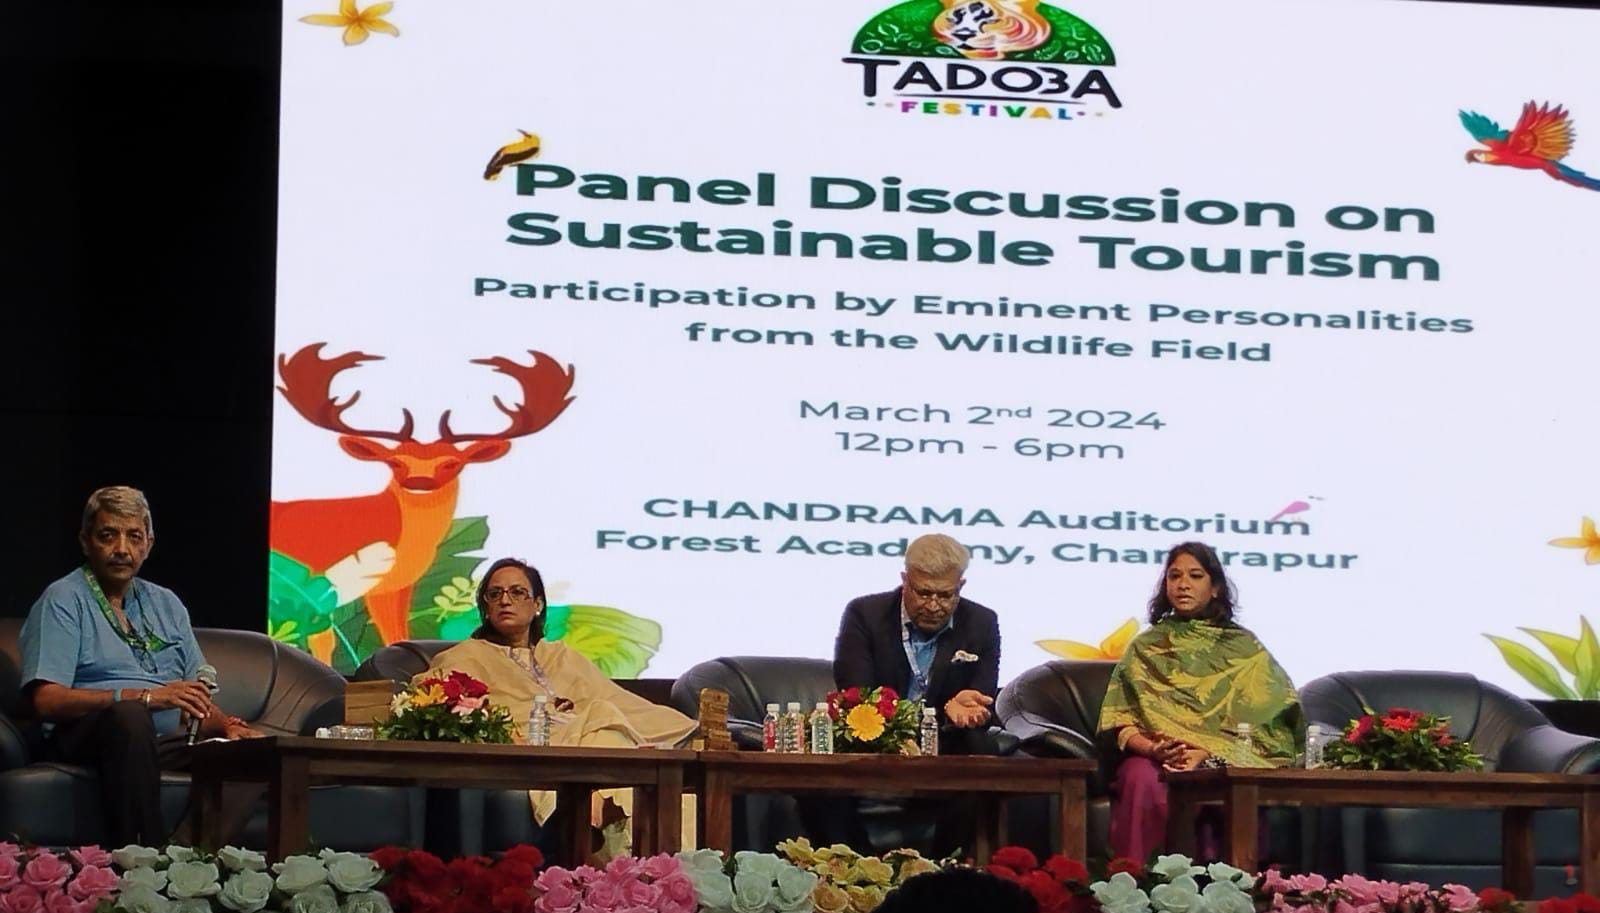 A glimpse from the Panel discussions at Tadoba Festival